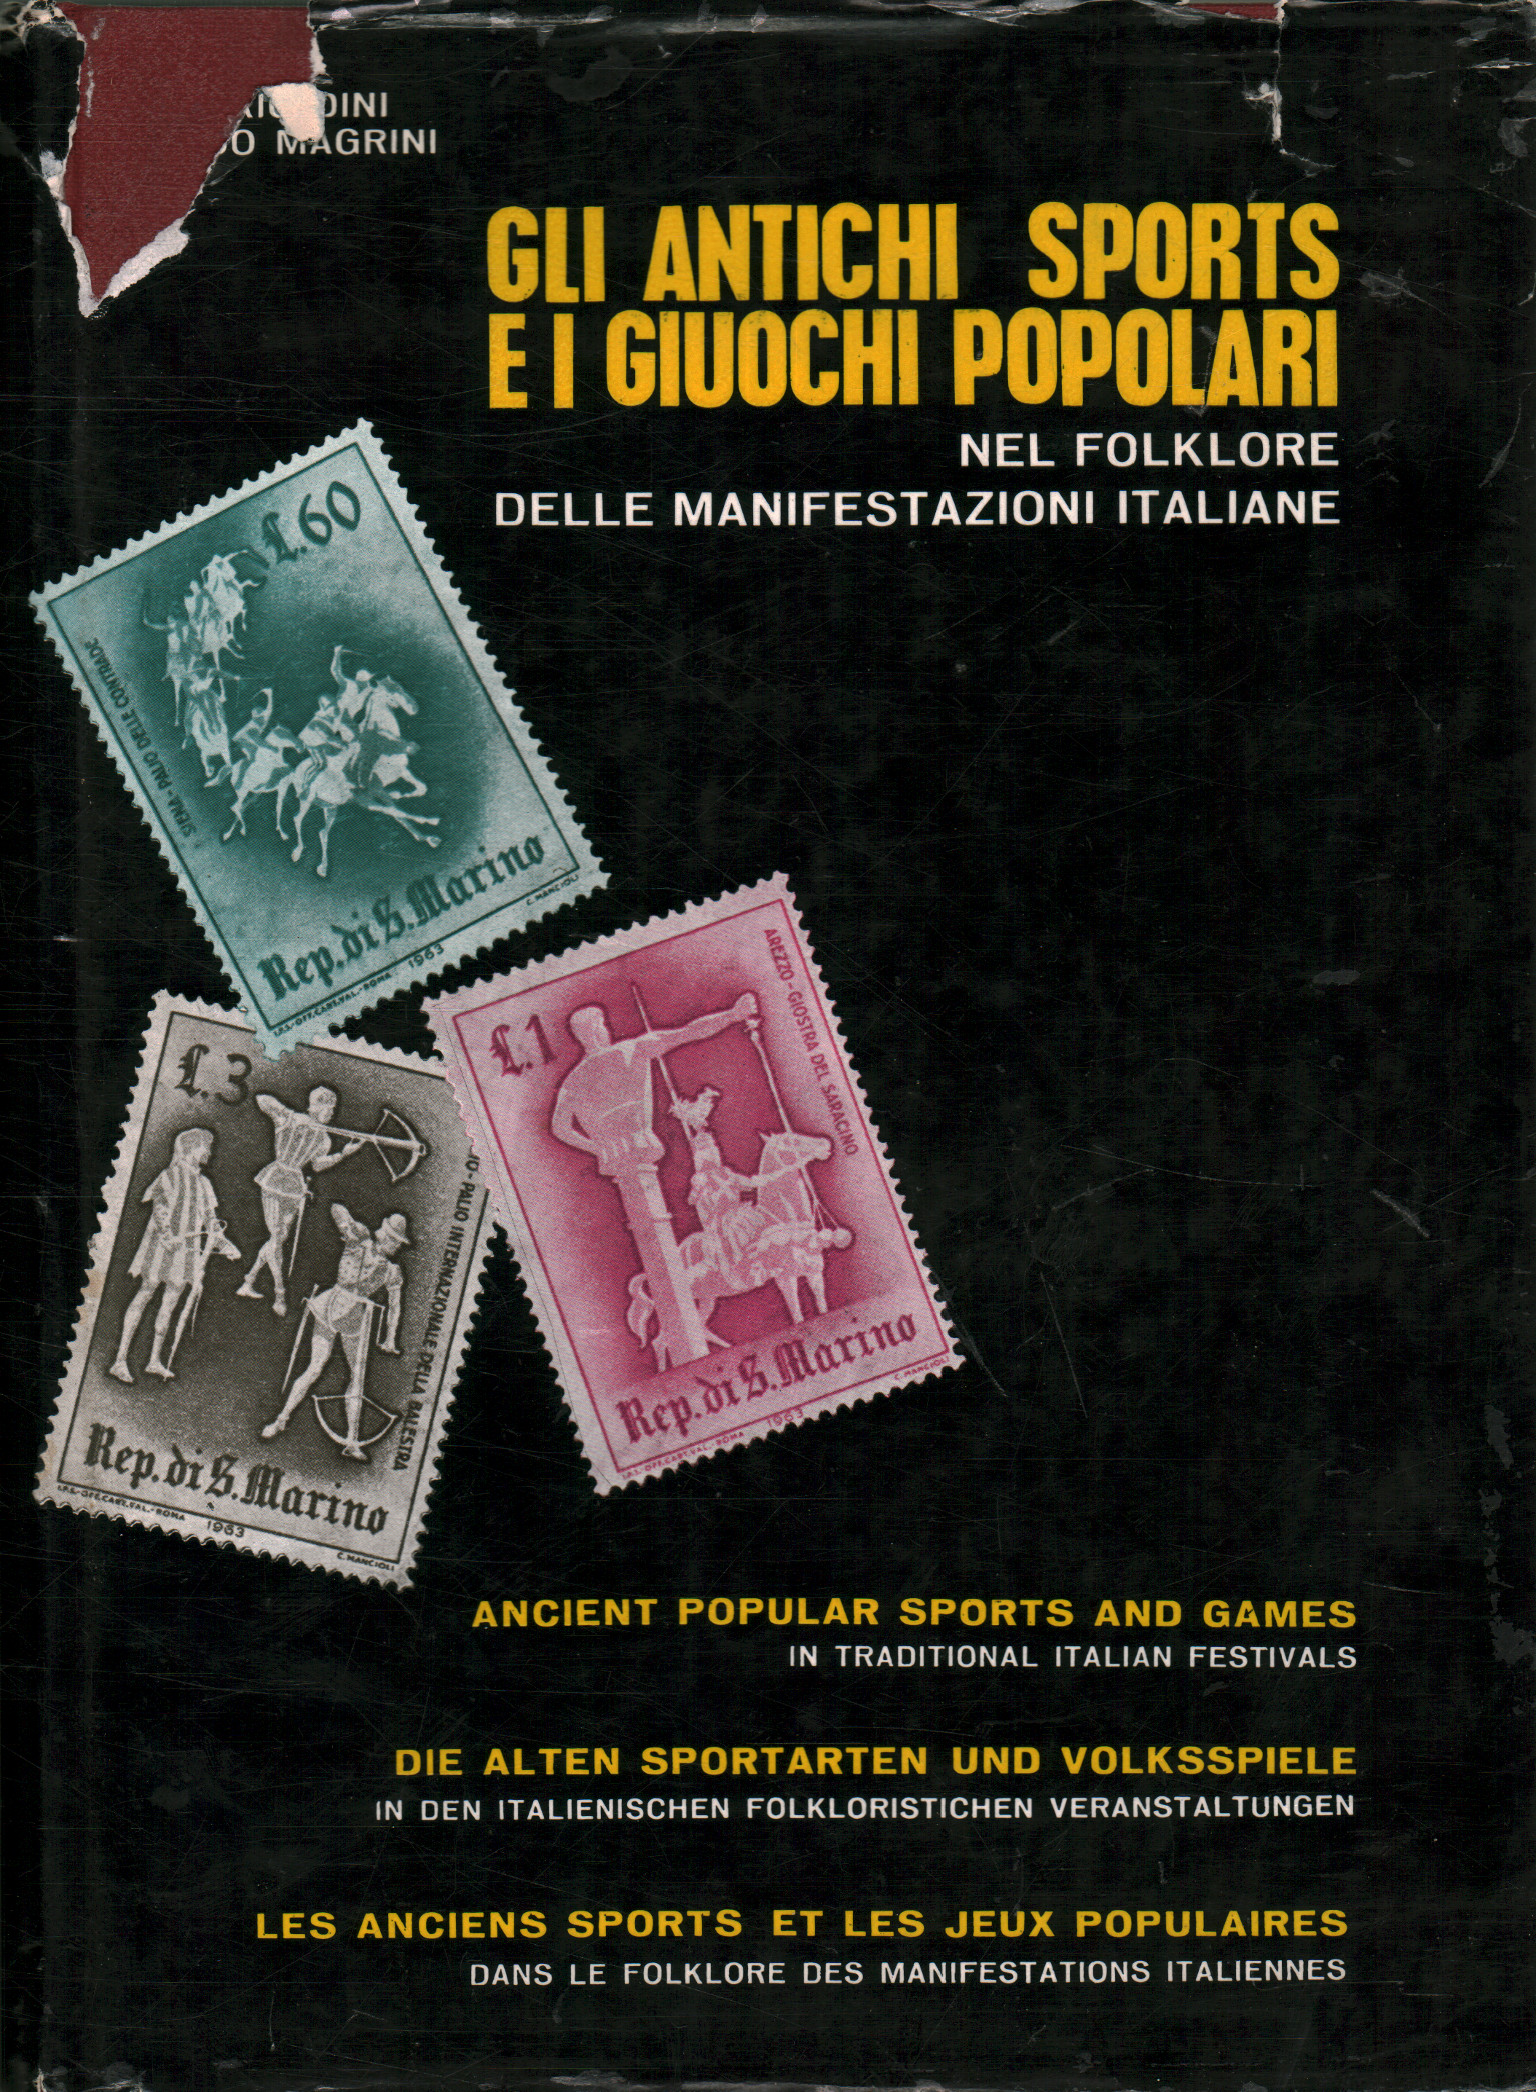 Ancient sports and popular games in folklore, Vittorio Dini Florido Magrini